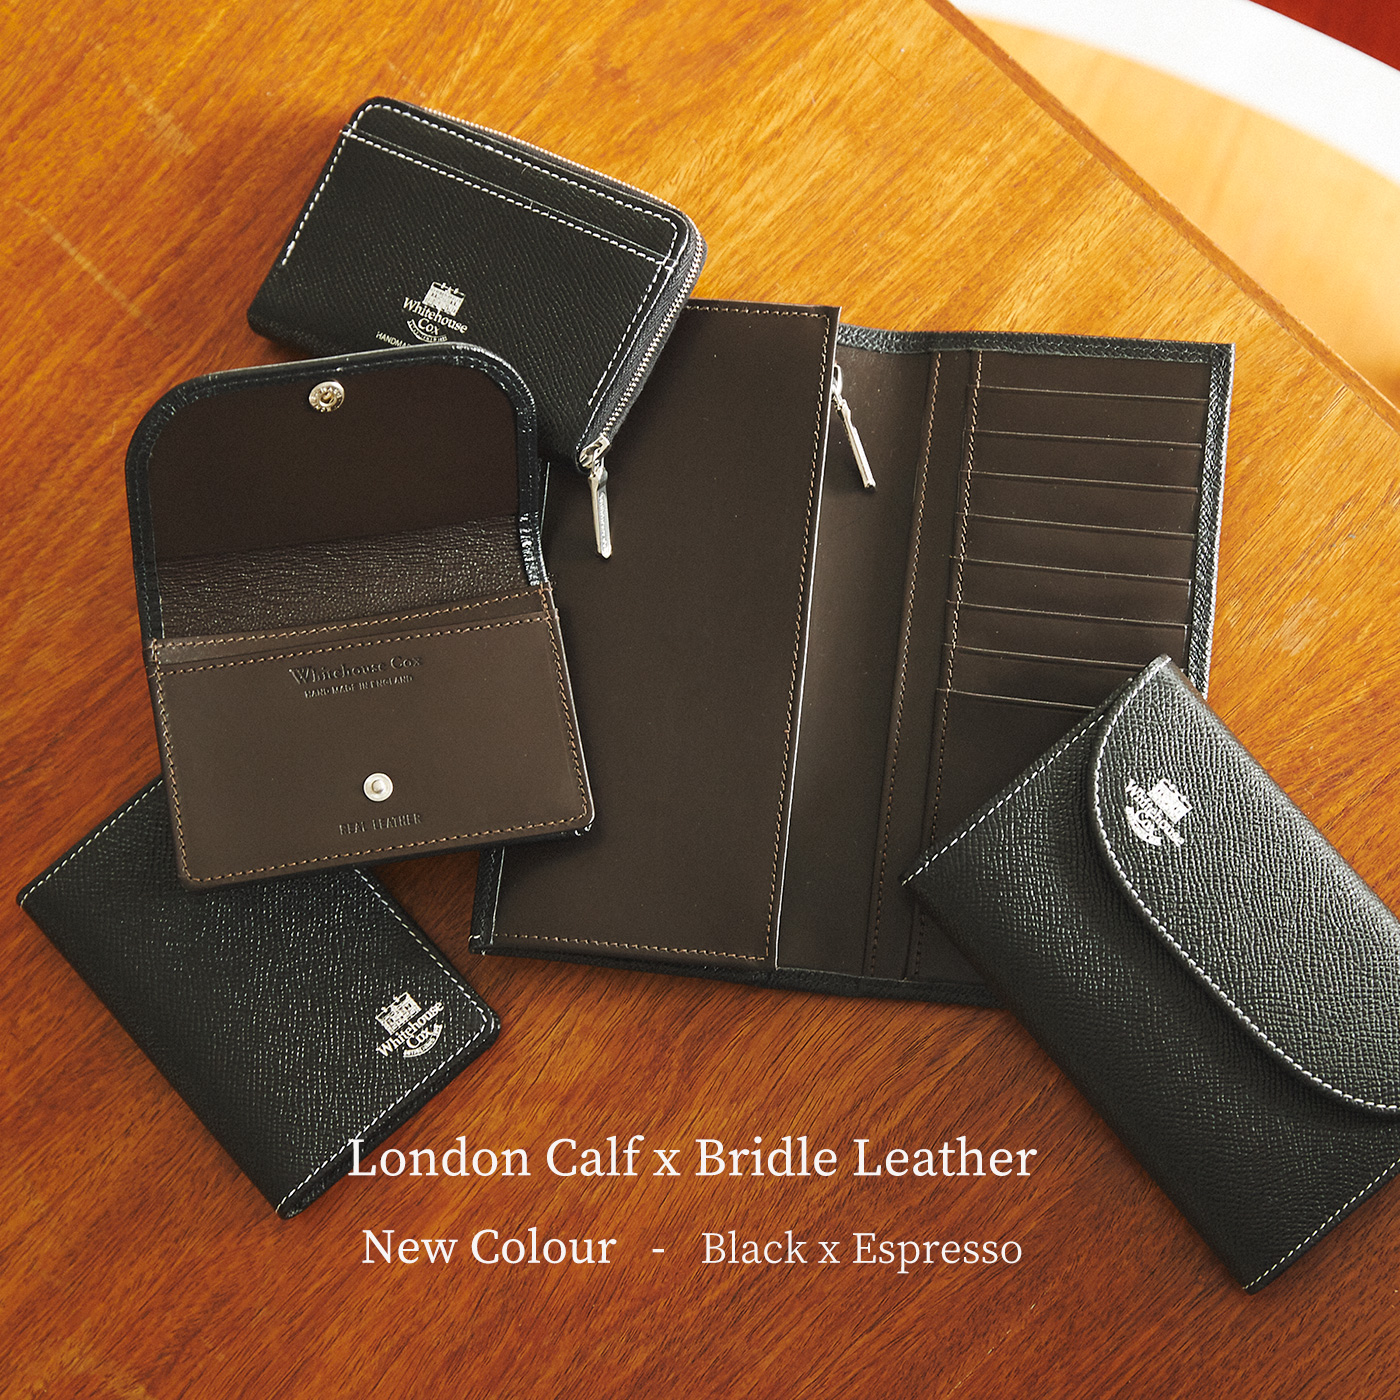 Whitehouse Cox – London Calf x Bridle Leather Collection – New Colour